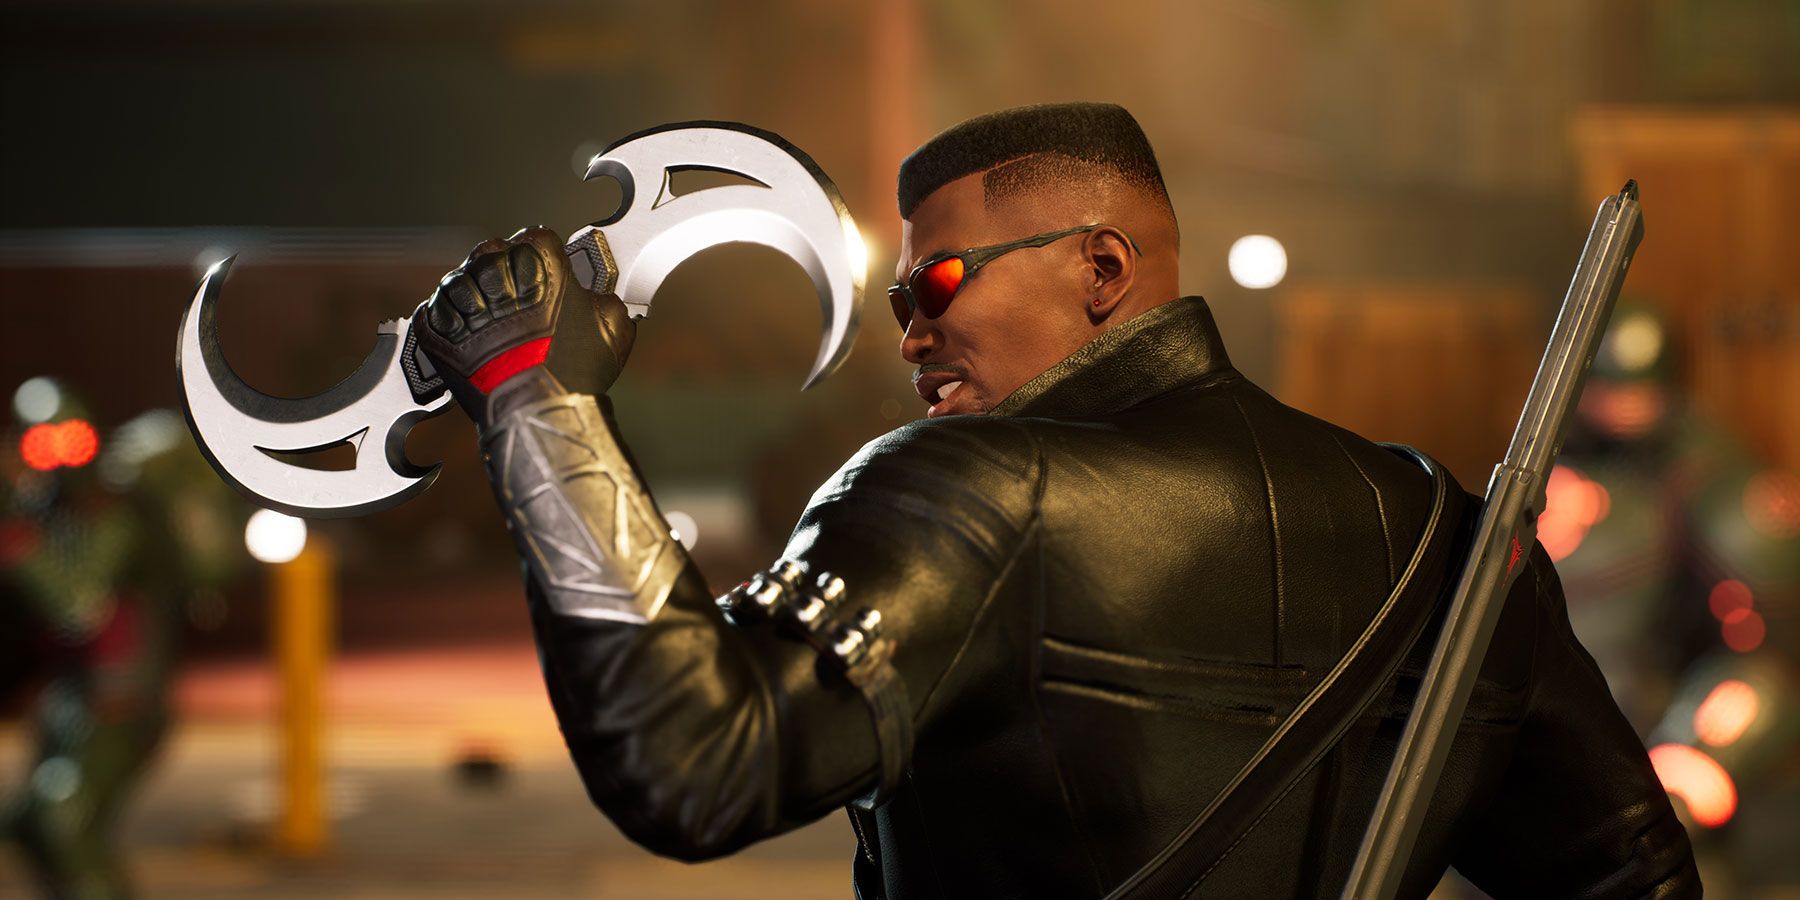 Latest Midnight Suns Trailer is All About Blade